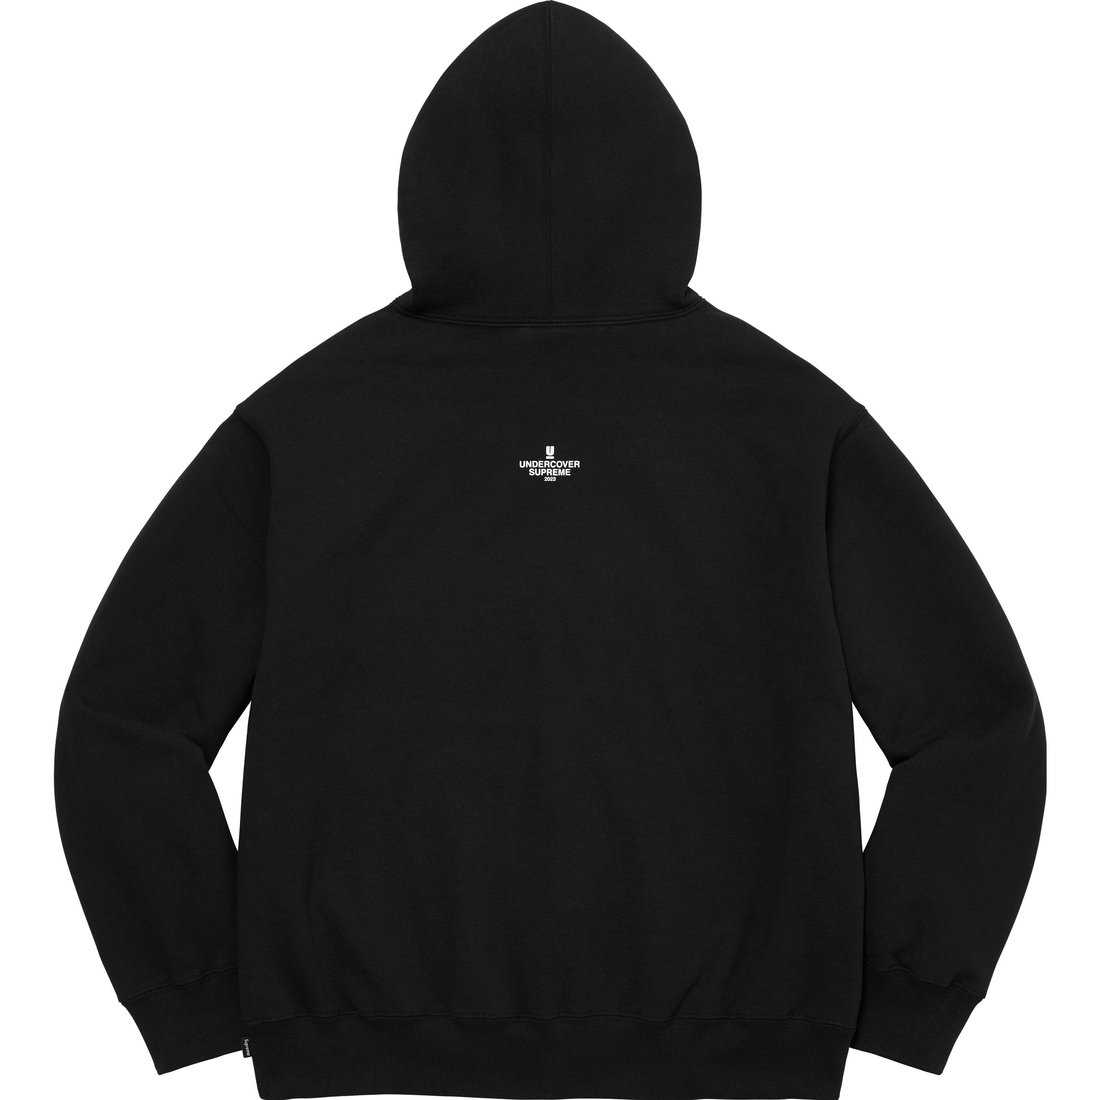 Details on Supreme UNDERCOVER Anti You Hooded Sweatshirt Black from spring summer
                                                    2023 (Price is $178)